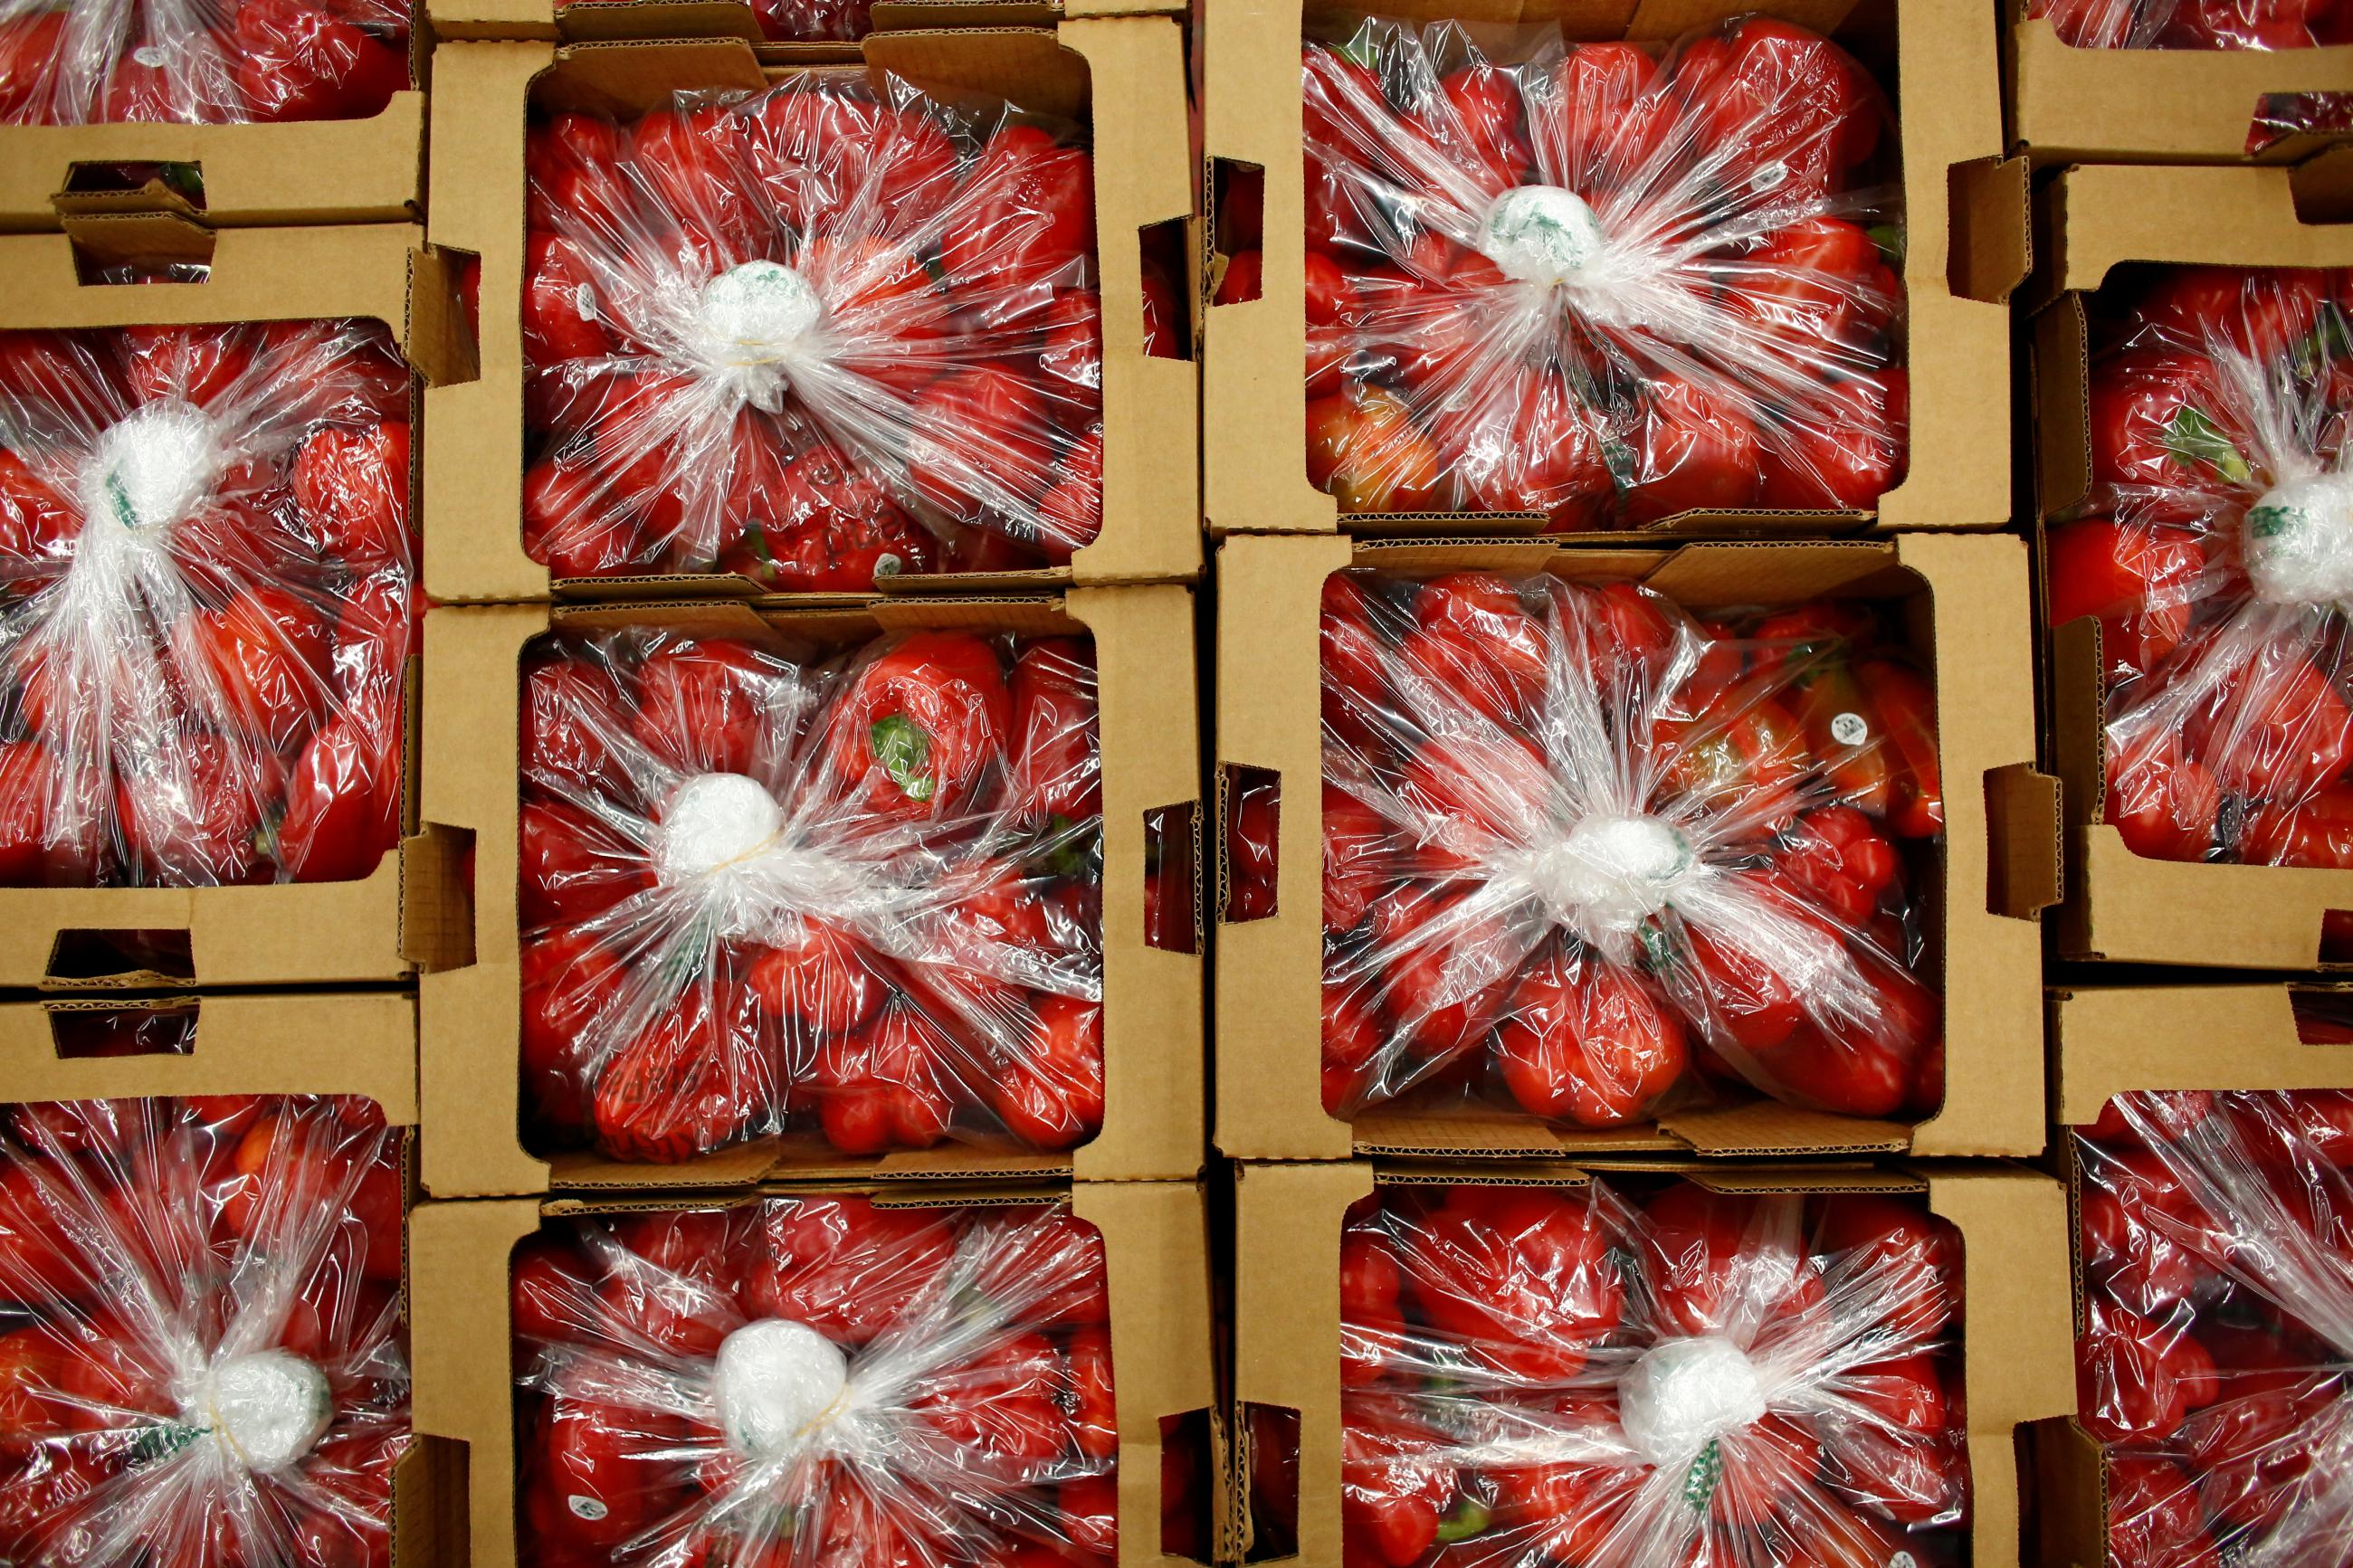 Red peppers, seen in the warehouse of Food Bank of the Rockies, will be distributed to people in need in Denver, Colorado, U.S., November 25, 2020.